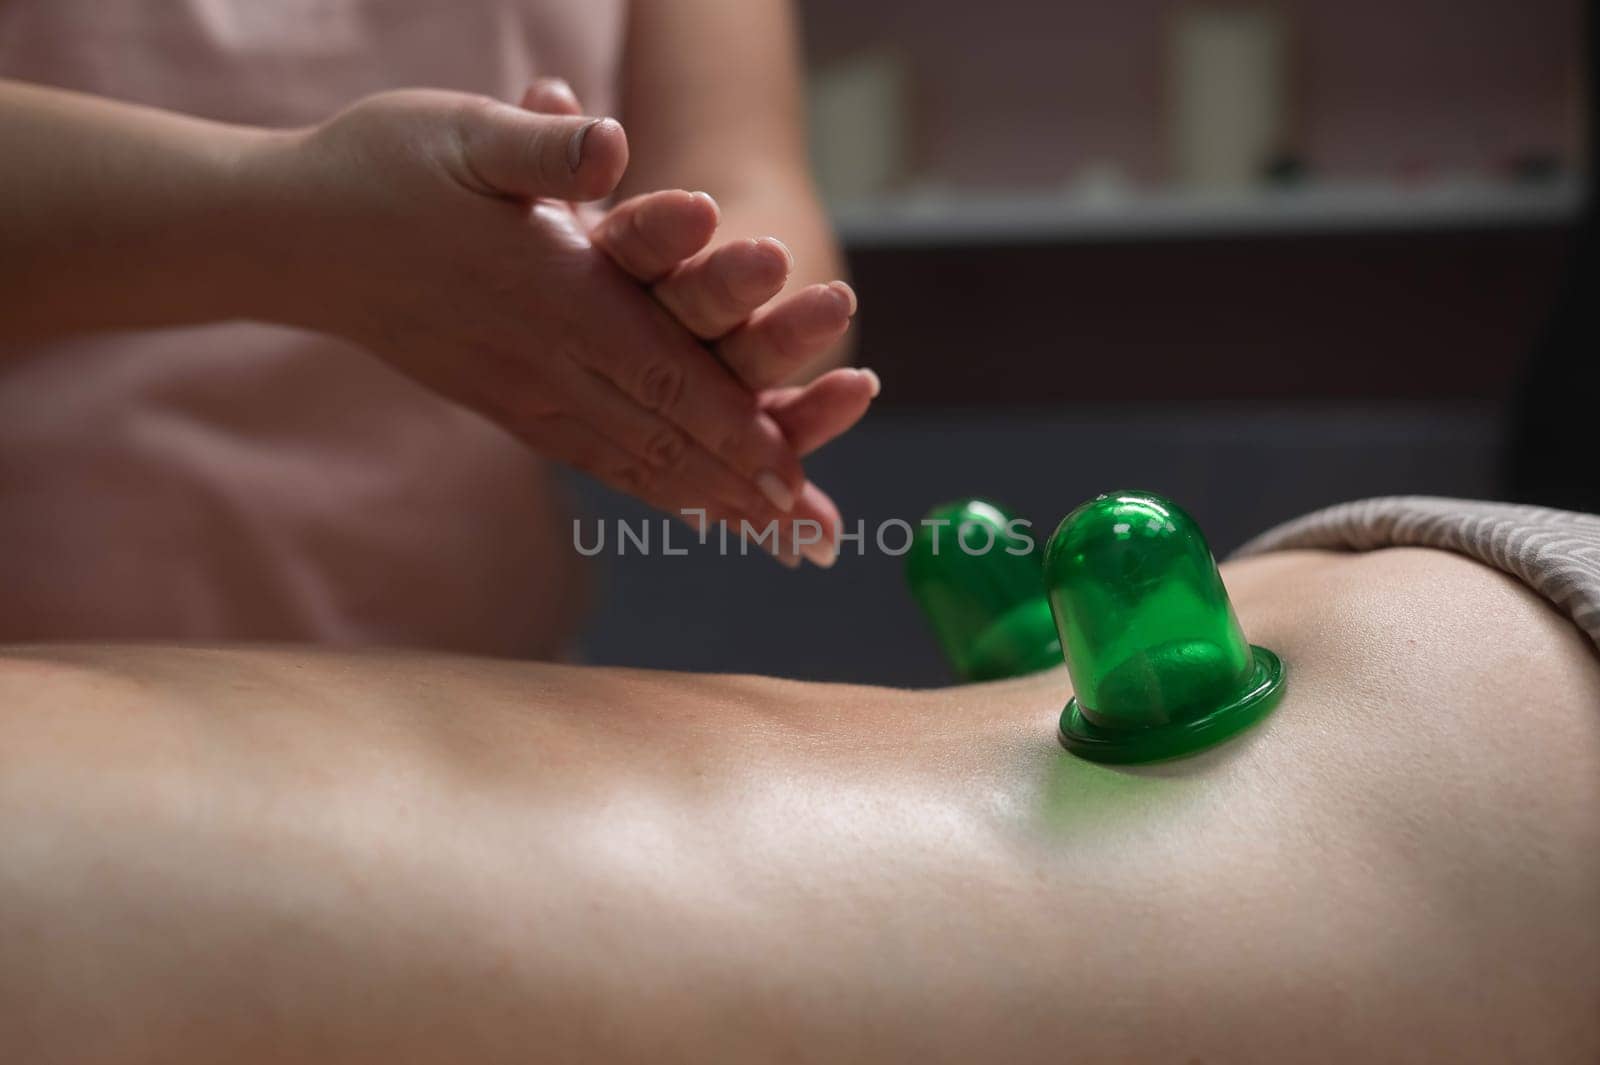 A woman undergoes an anti-cellulite massage procedure using a vacuum jar. Close-up of the lower back. by mrwed54